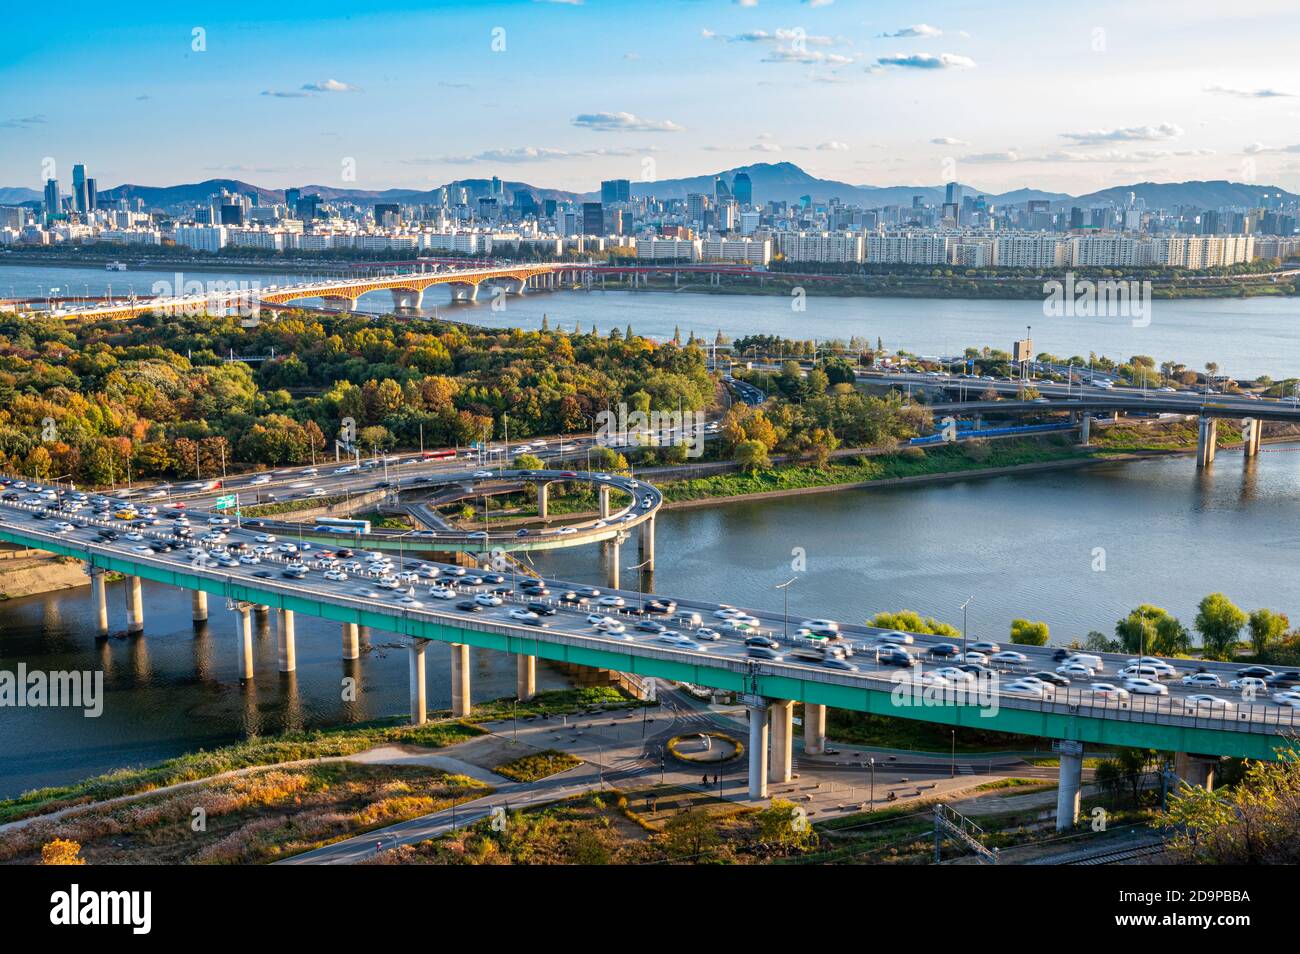 Autumn scenery of the Han River in Seoul, South Korea in 2020. Stock Photo